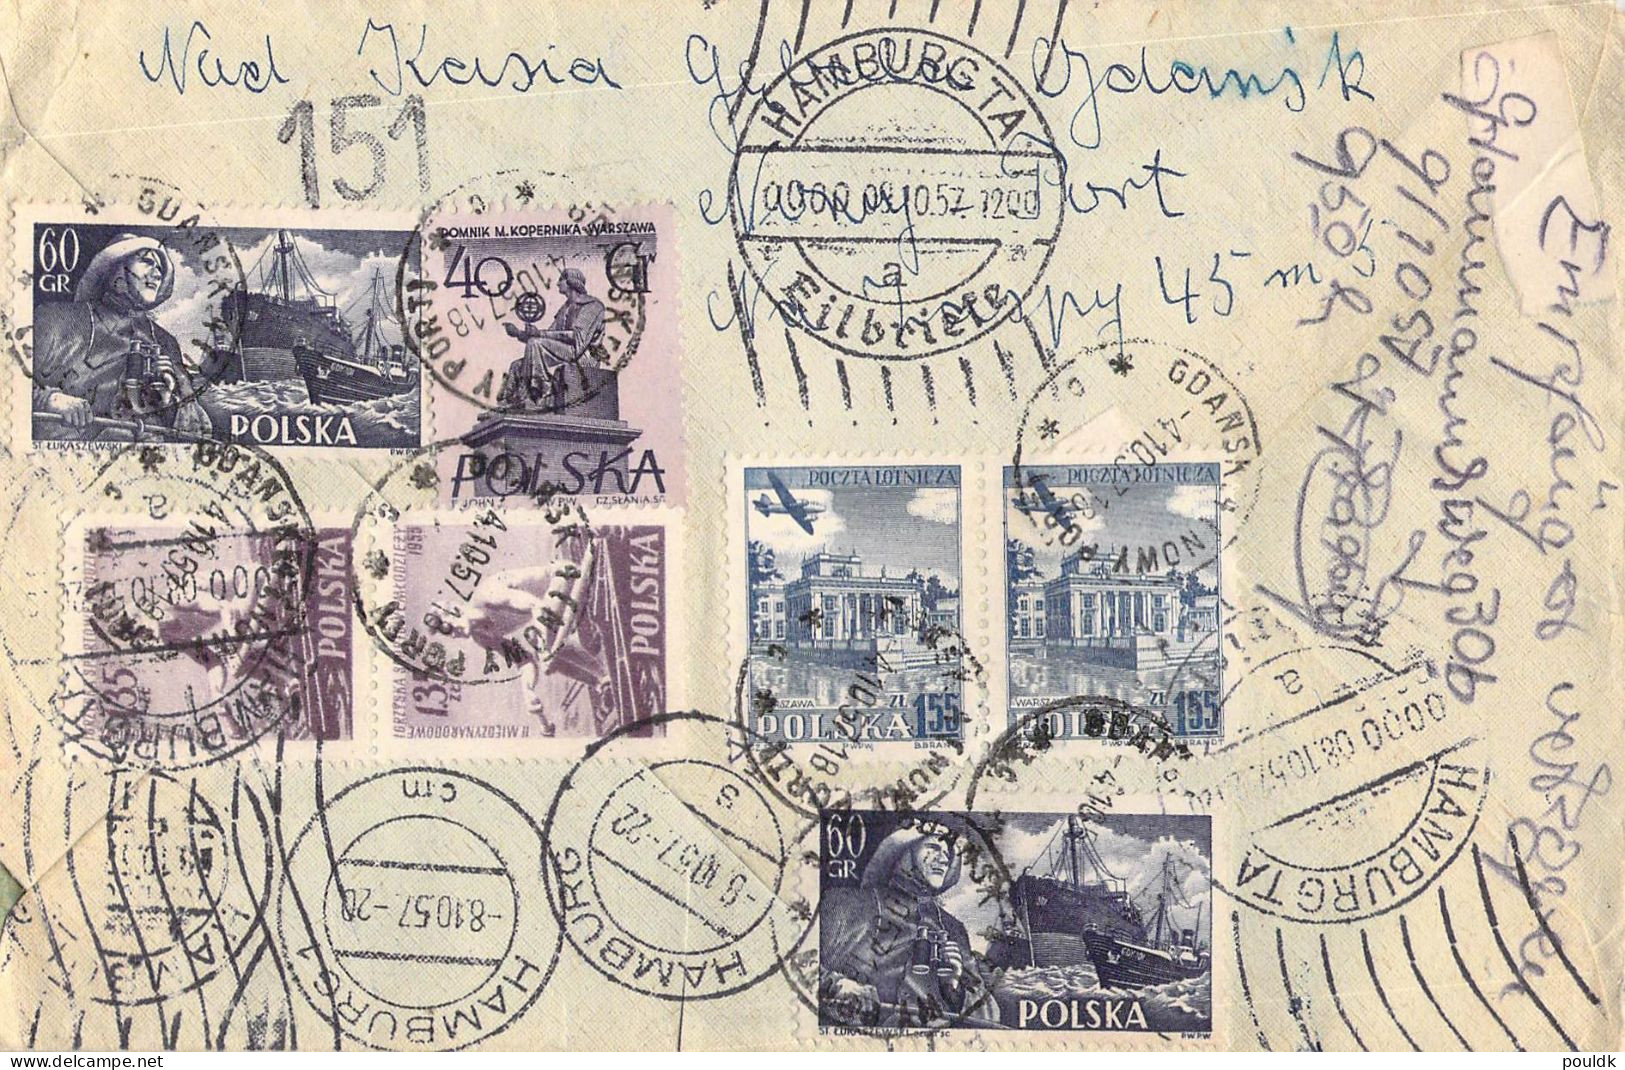 Poland Expres Cover Posted Gdansk 4 (Nowy Port) 4.10.1957 - Well Travelled In Hamburg. Dirty & Cut Into. Postal Weight 0 - Covers & Documents